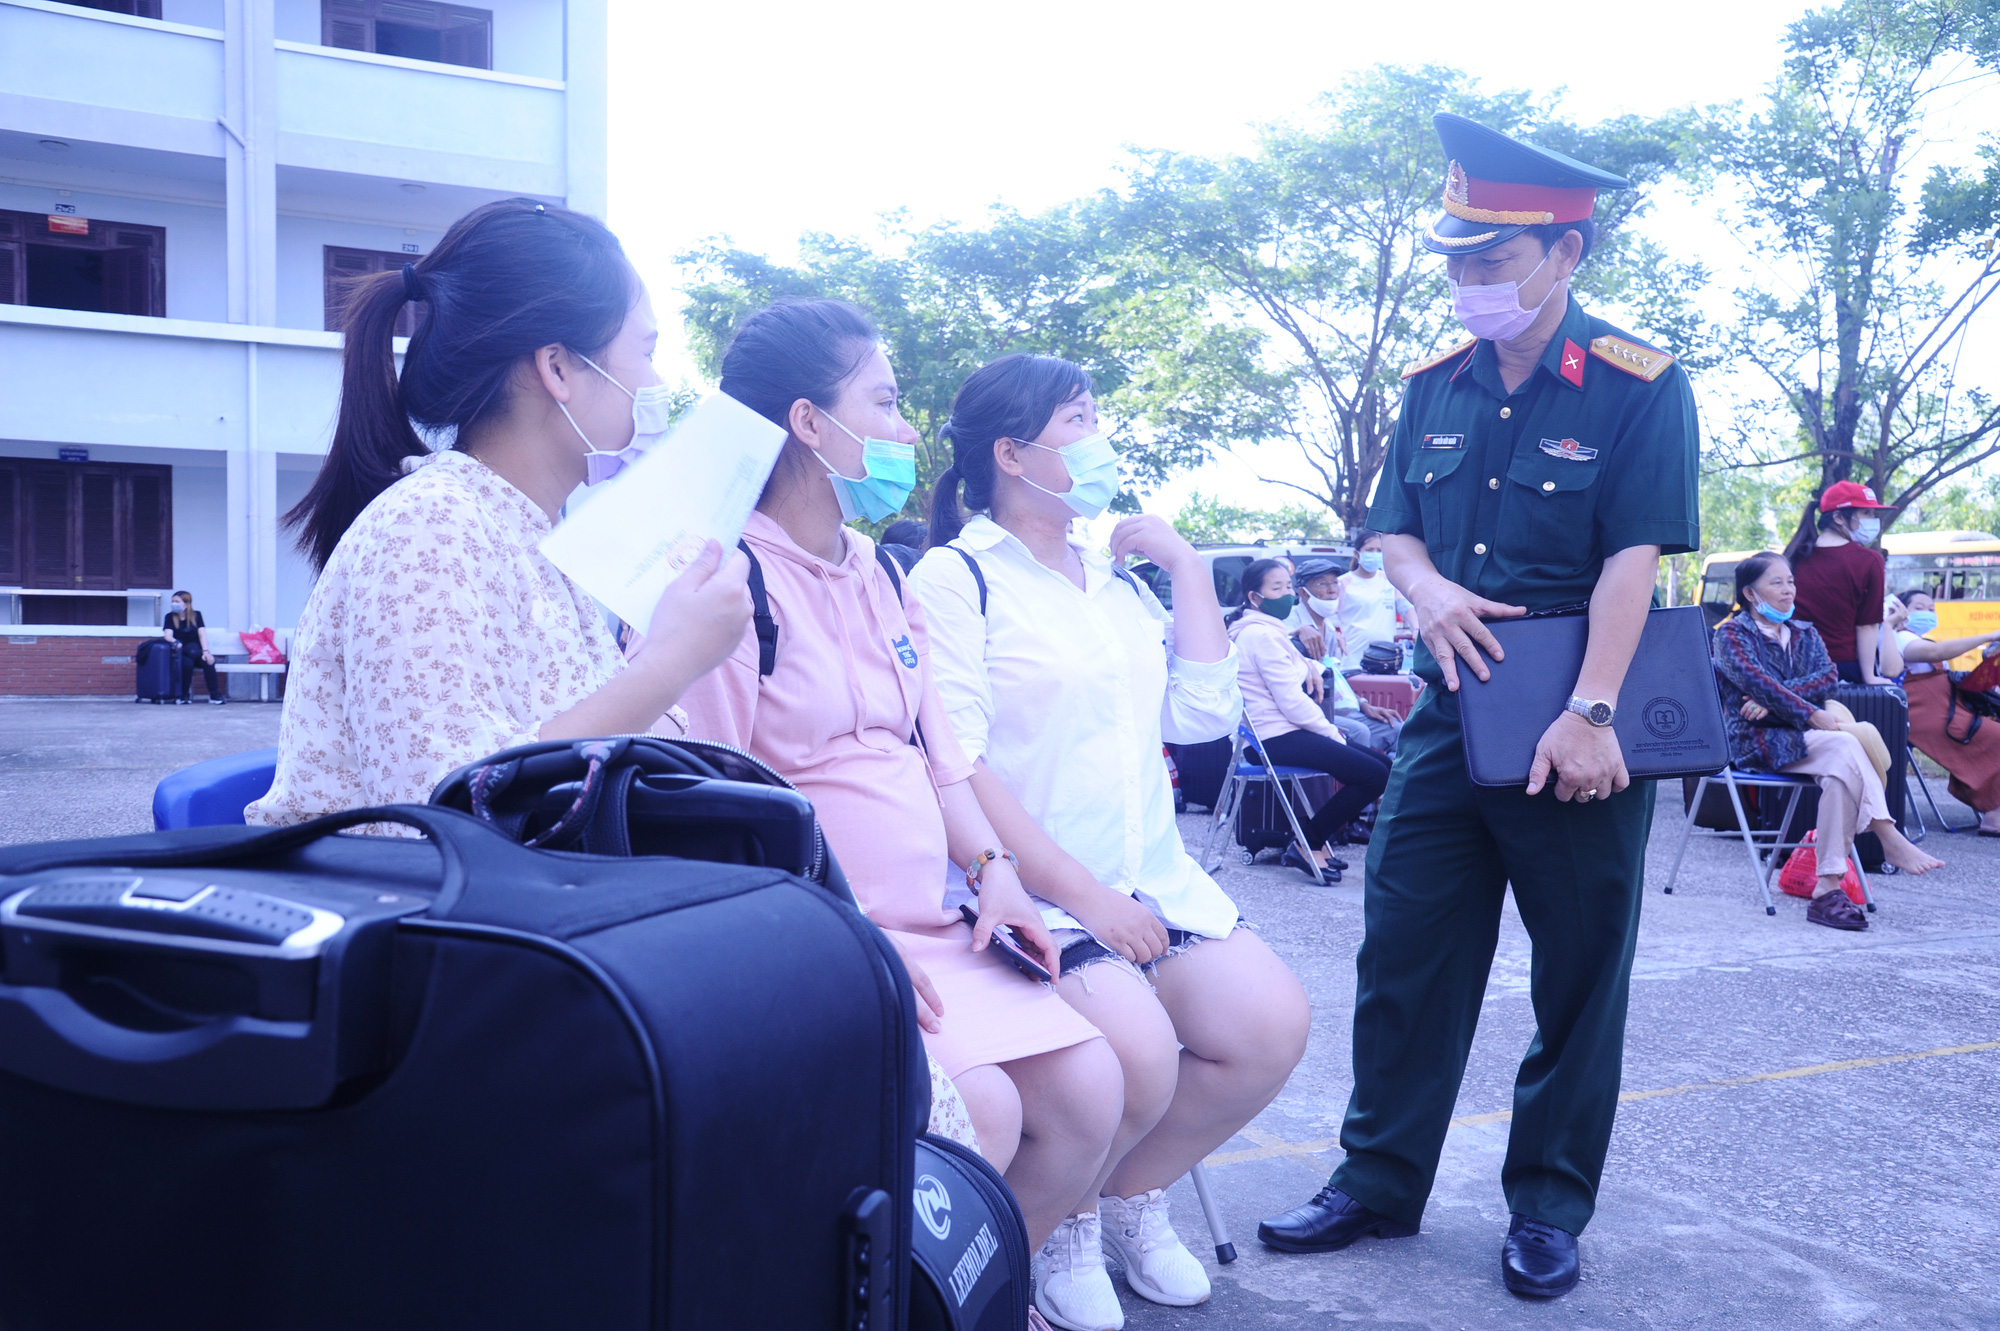 Col. Nguyen Huu Nghia (right) from Quang Nam Province’s Military Command talks to pregnant women who have completed their mandatory novel coronavirus disease (COVID-19) quarantine at a facility in Quang Nam Province, Vietnam, June 12, 2020. Photo: Le Trung / Tuoi Tre